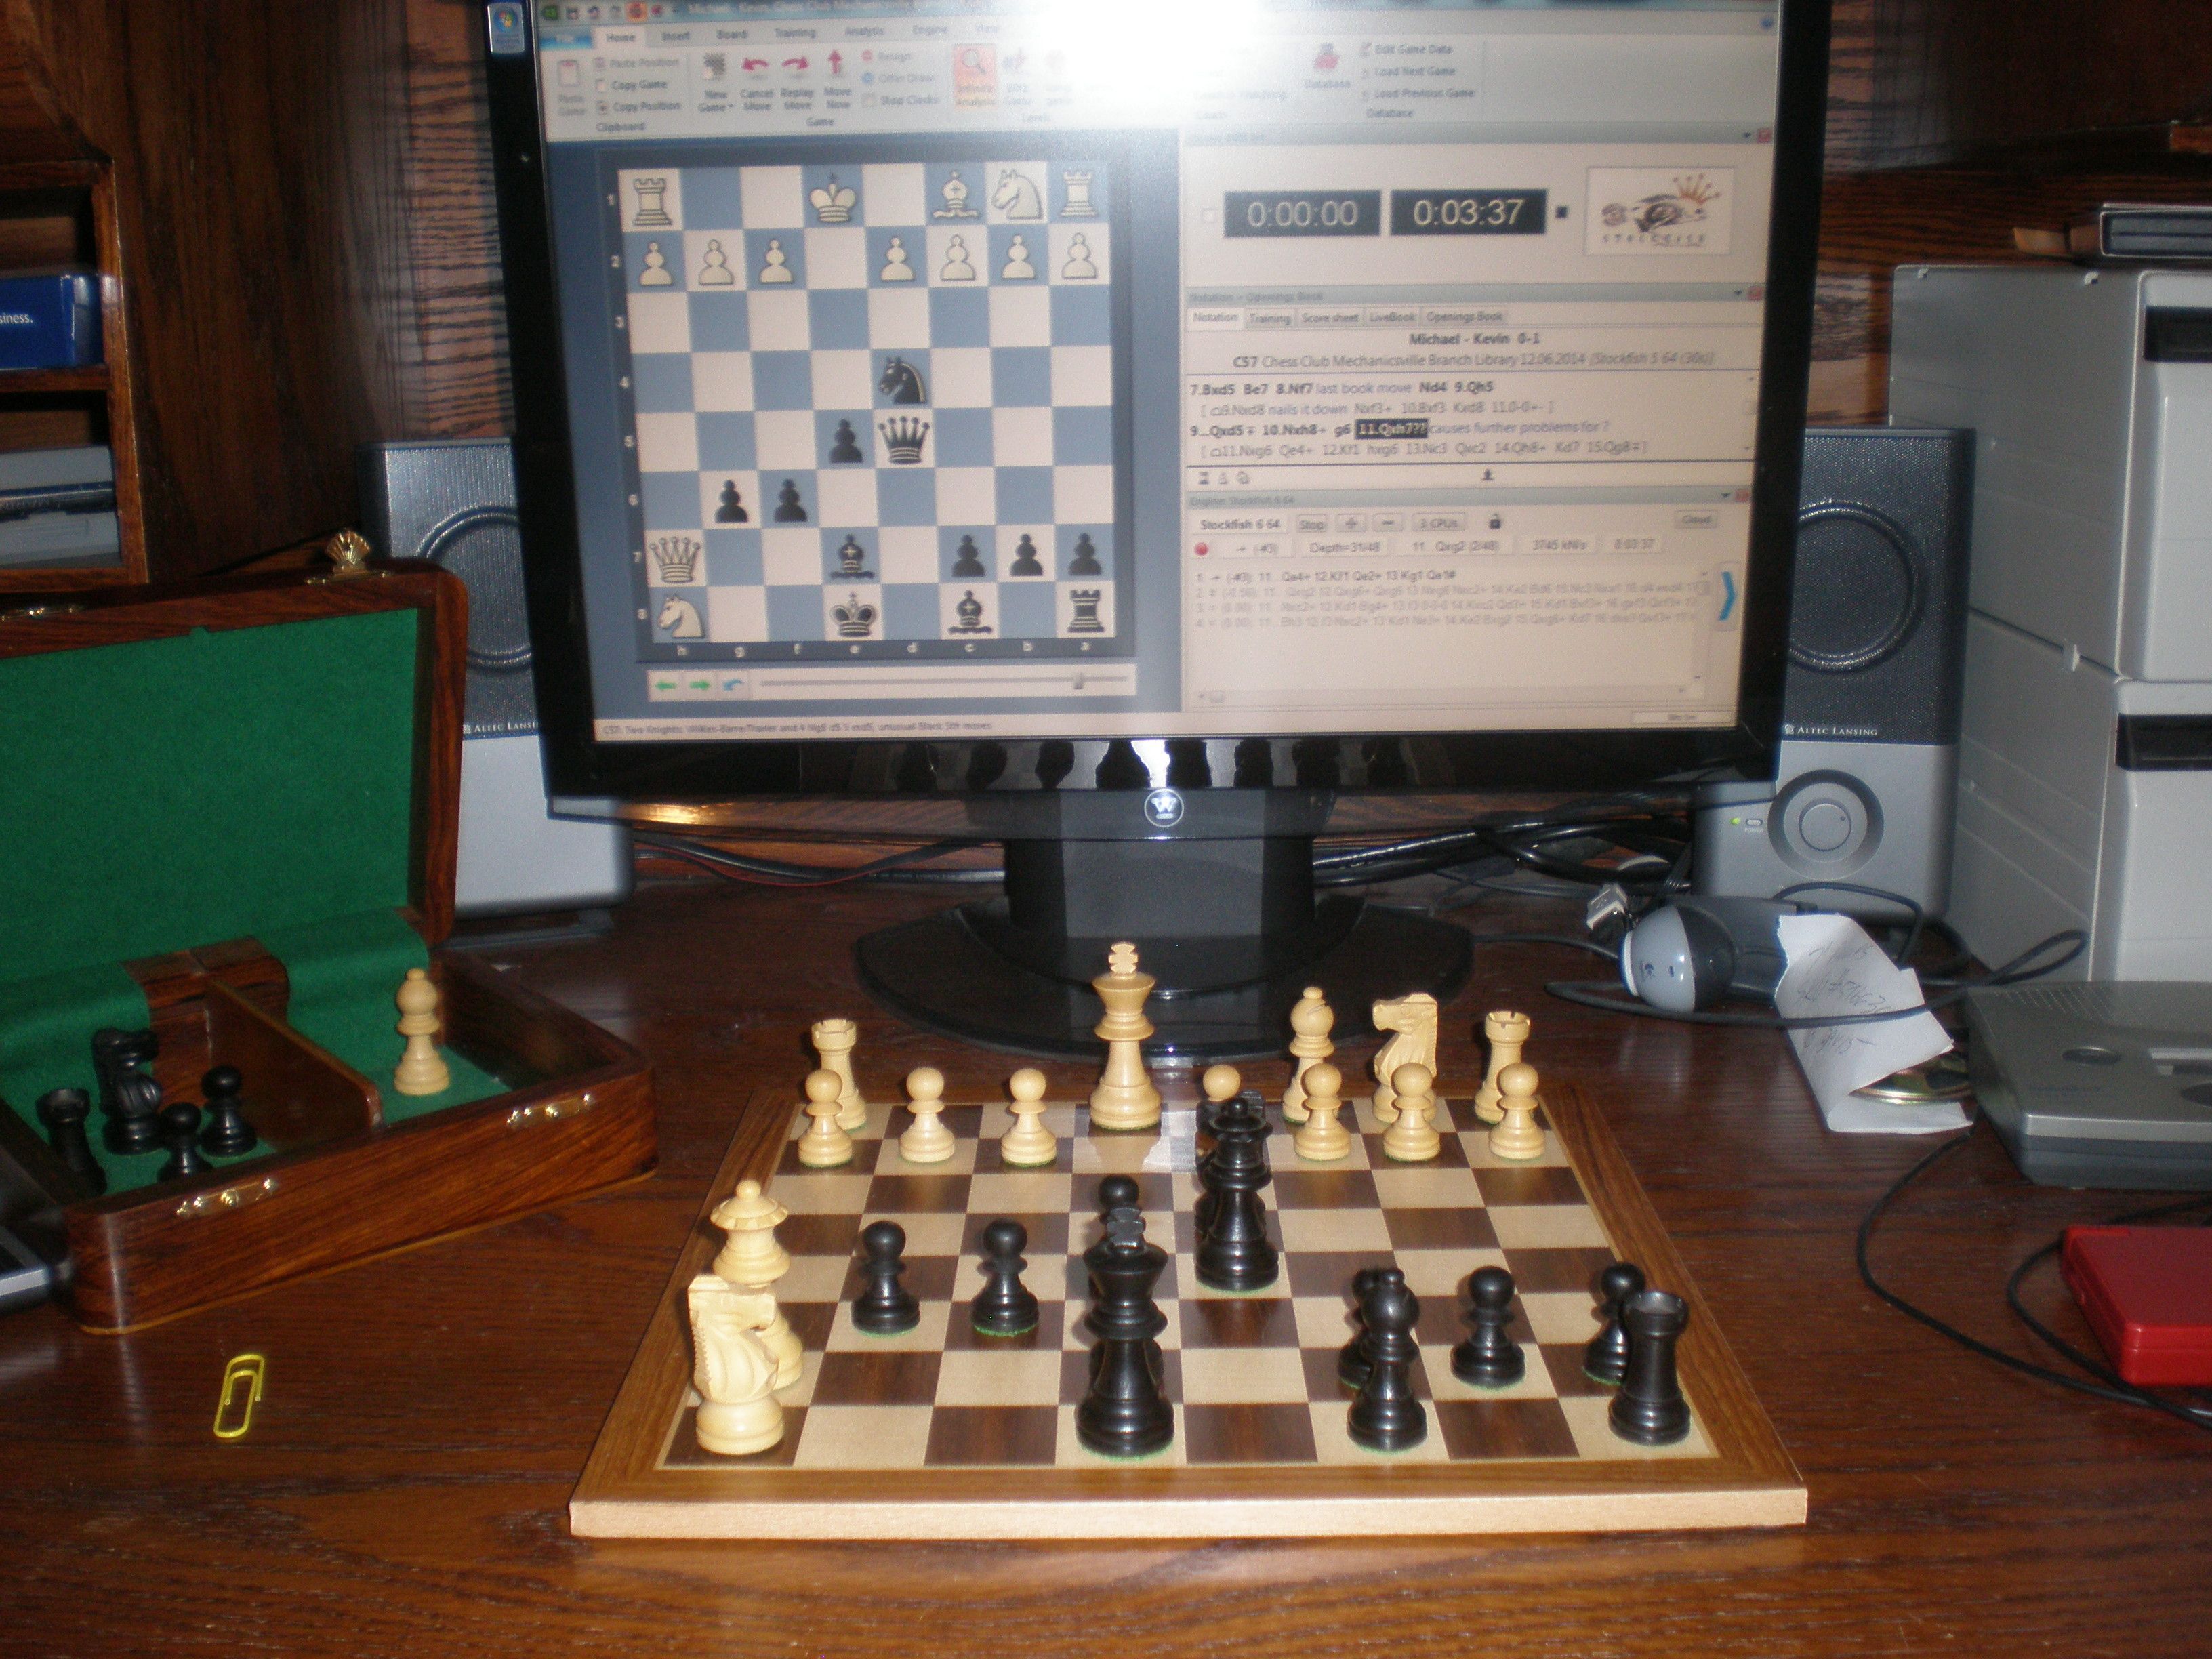 How to Analyze a Chess Game